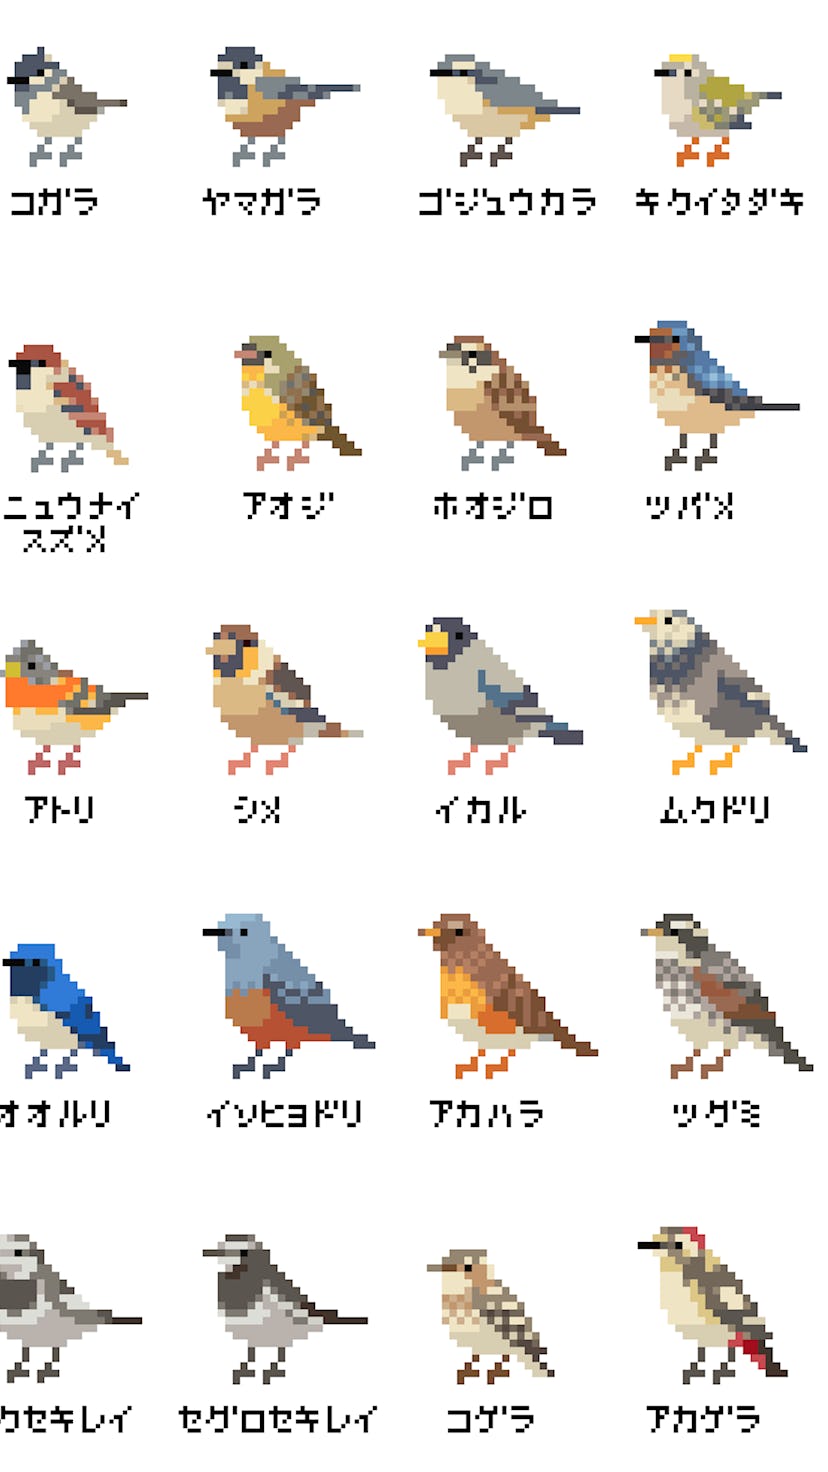 A pixelated bird collage